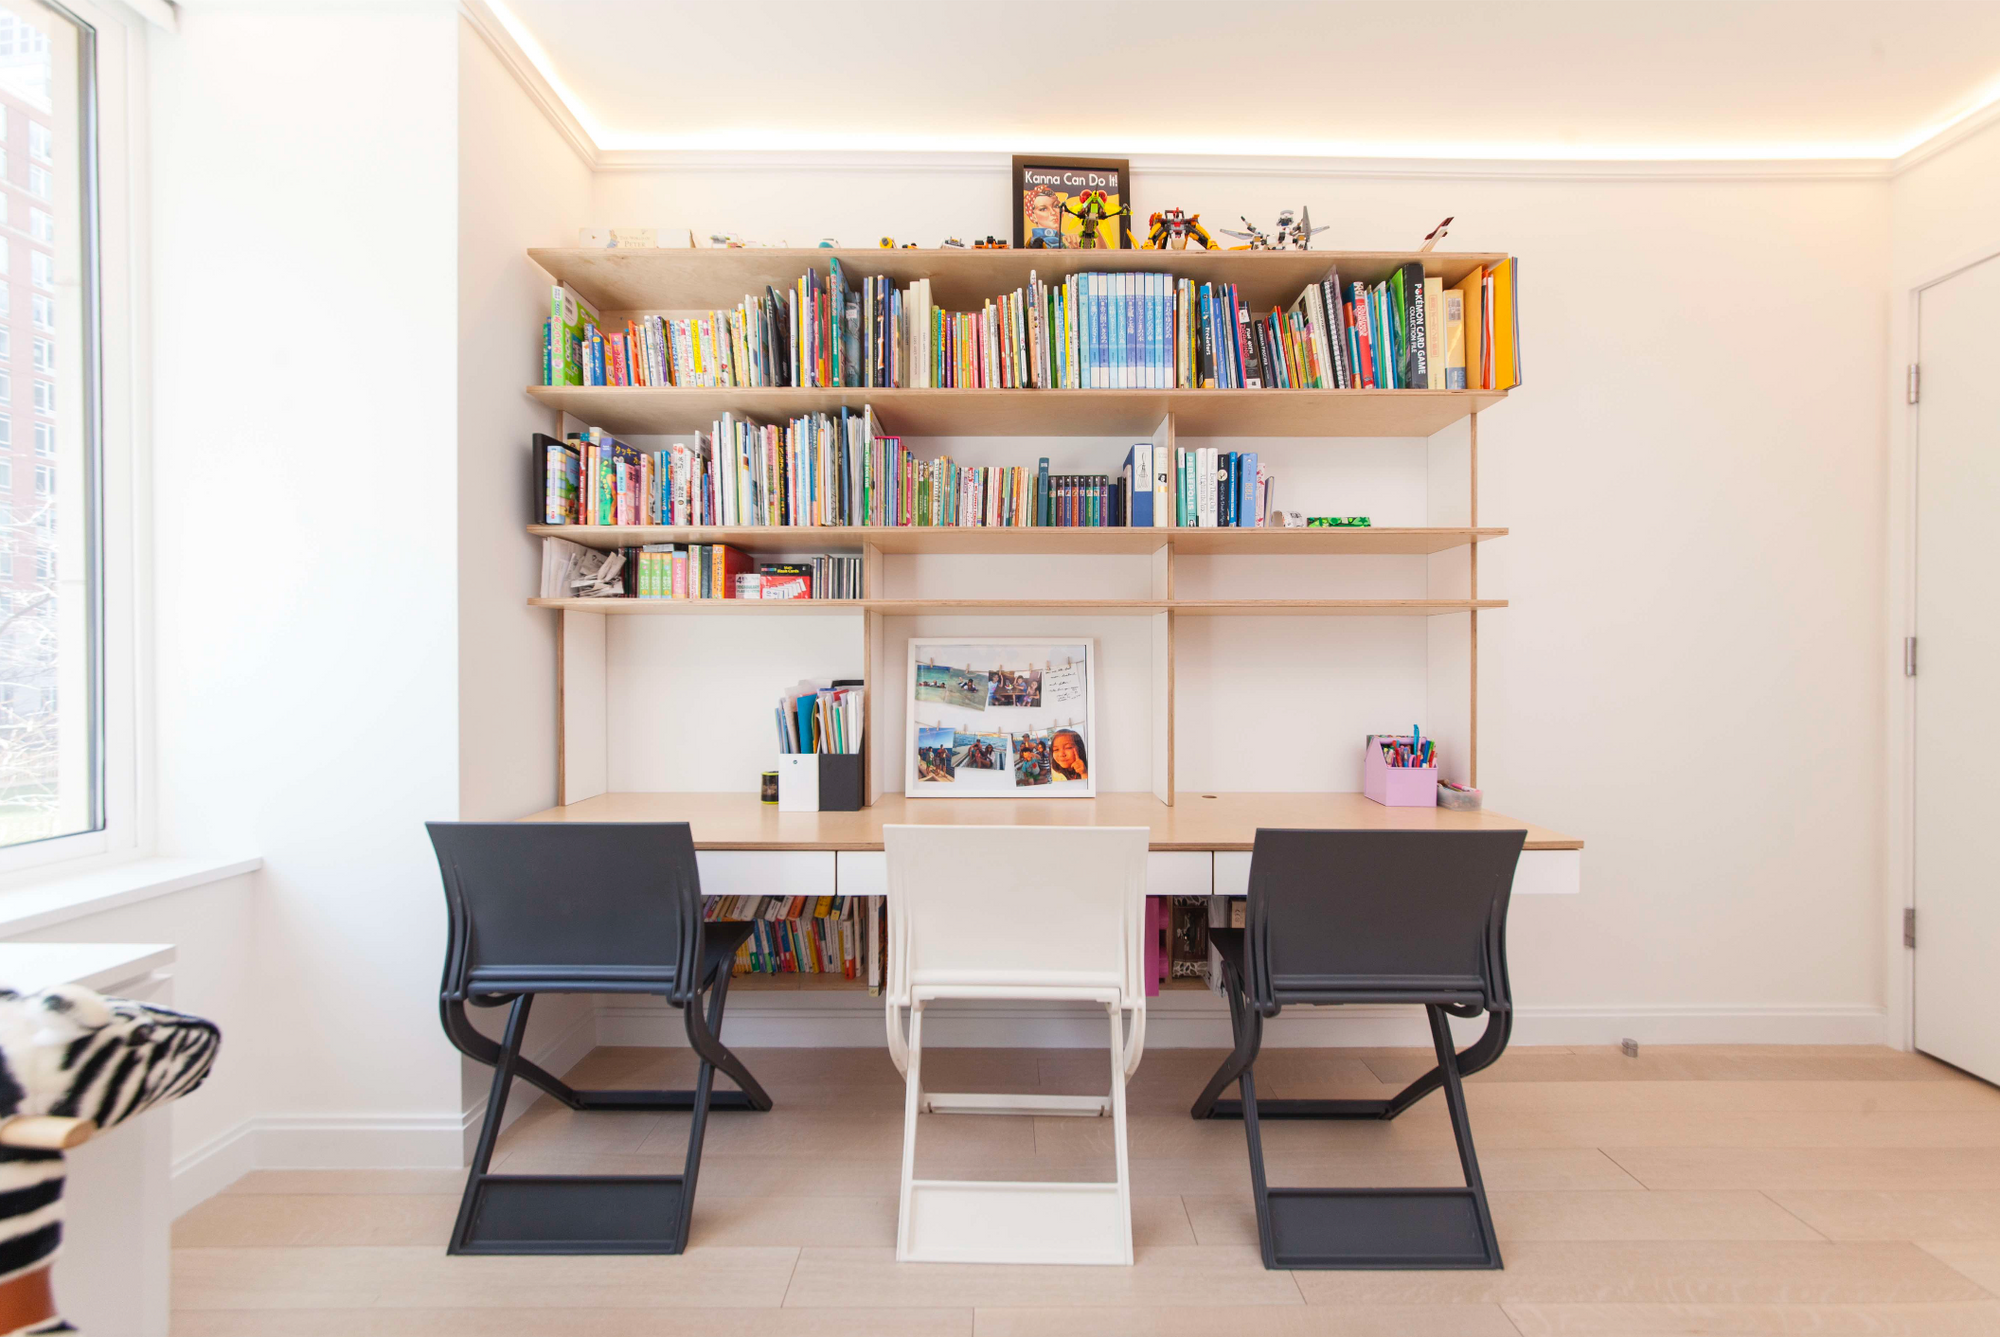 Modern study area with a white desk, two chairs, and a large bookshelf filled with colorful books.